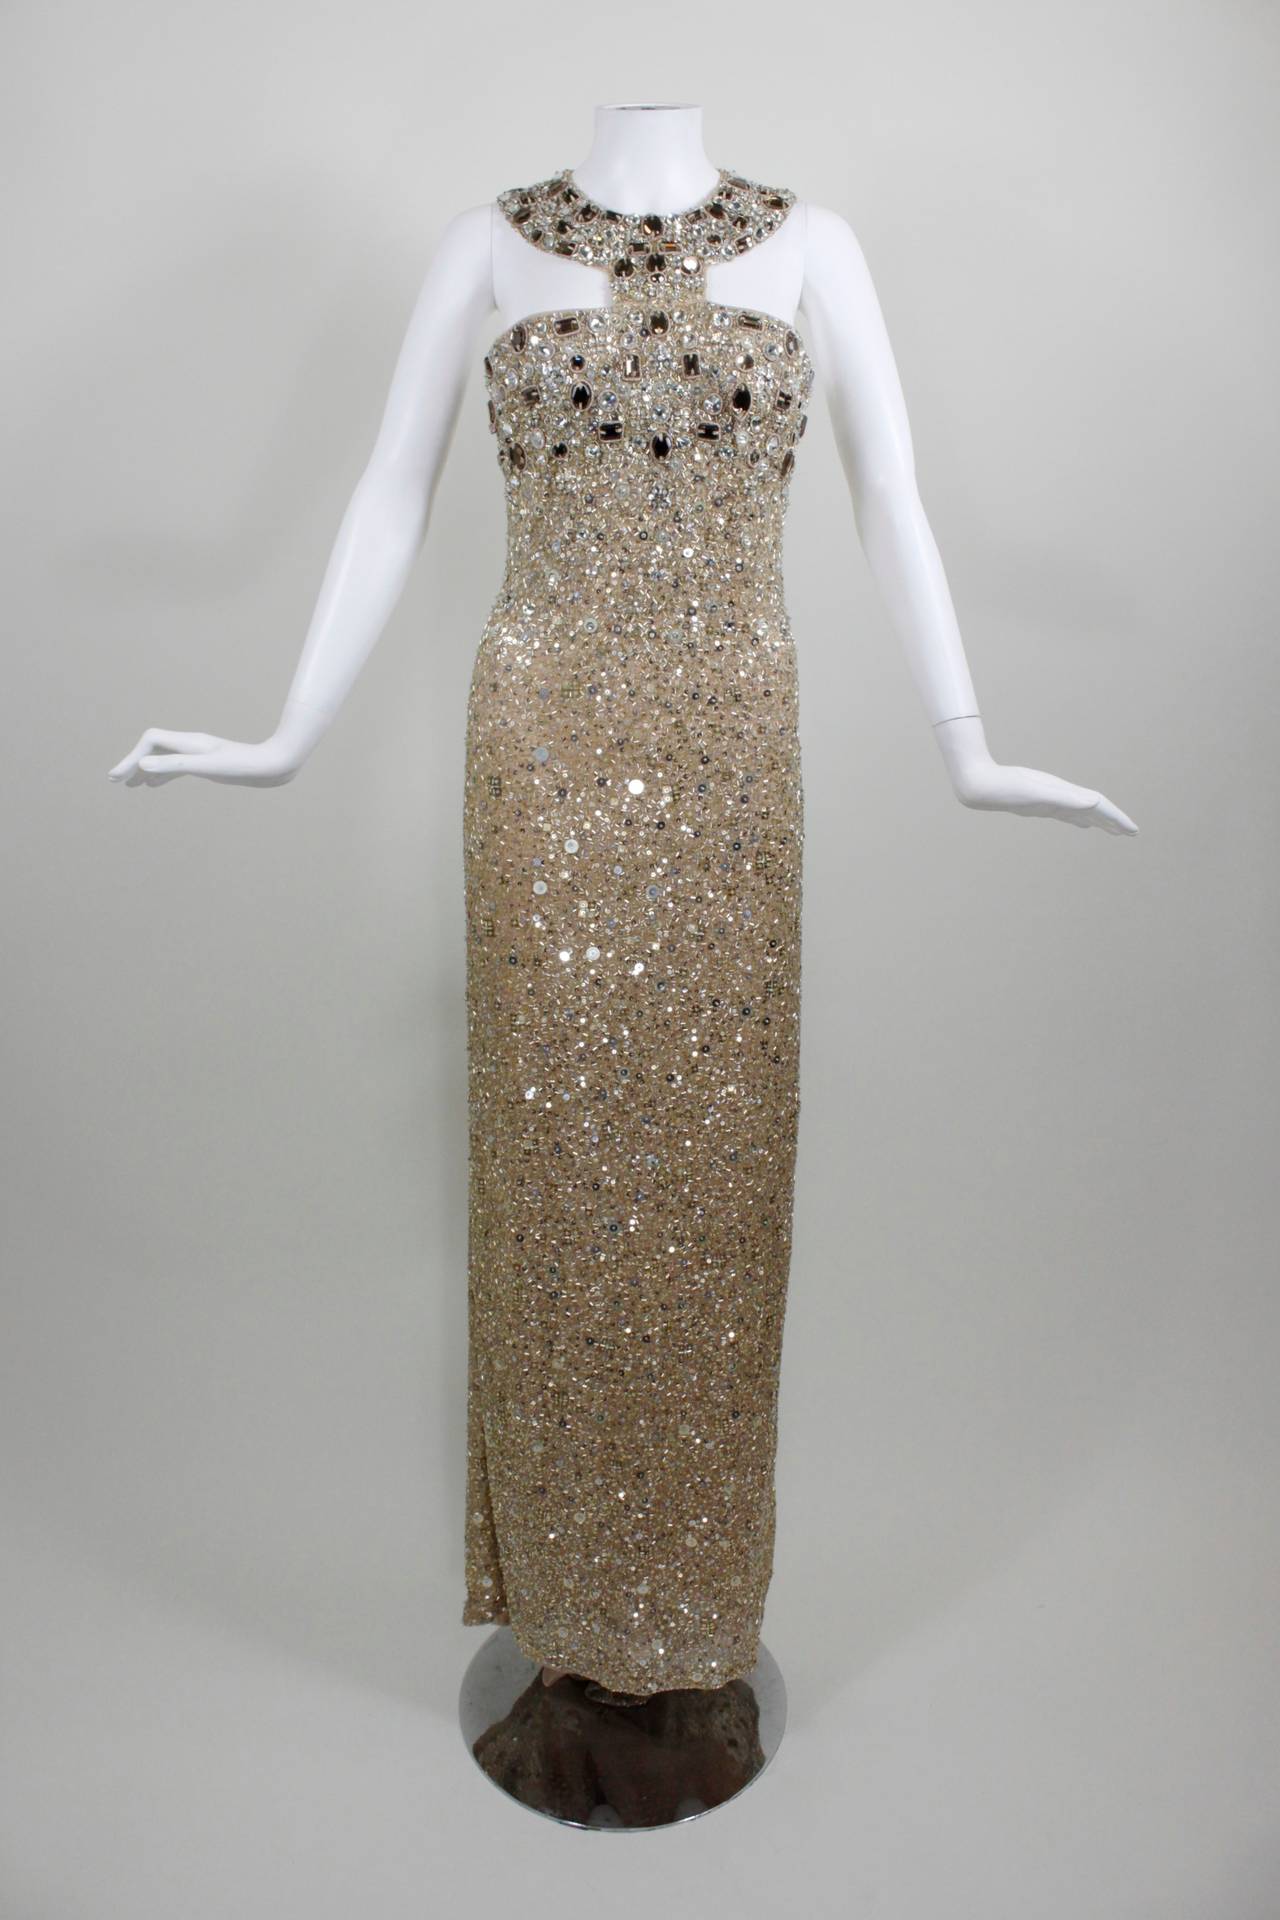 A stunning gown from the great American designer Oscar de la Renta. The Egyptian collar-inspired bodice features large brown, clear, and champagne glass rhinestones, as well as metallic sequins and beads throughout. The gown is fully lined, has a